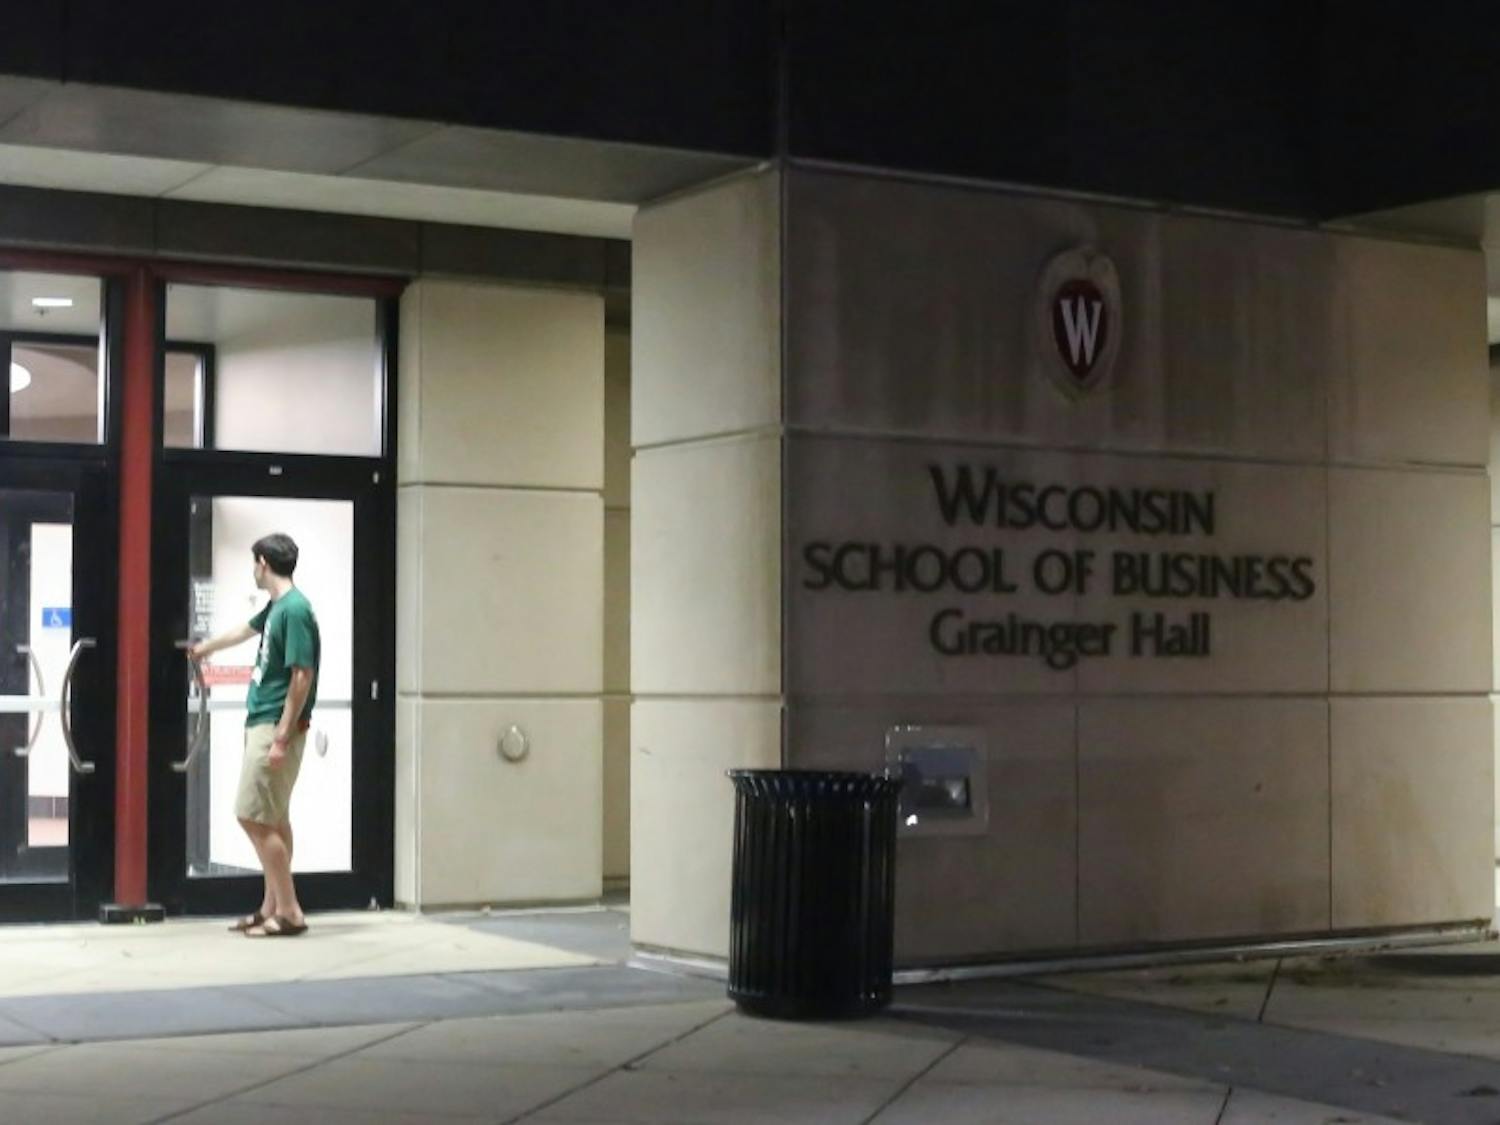 A UW-Madison student said a man touched her and attempted to kiss her at approximately 3 p.m. Monday in the business building.